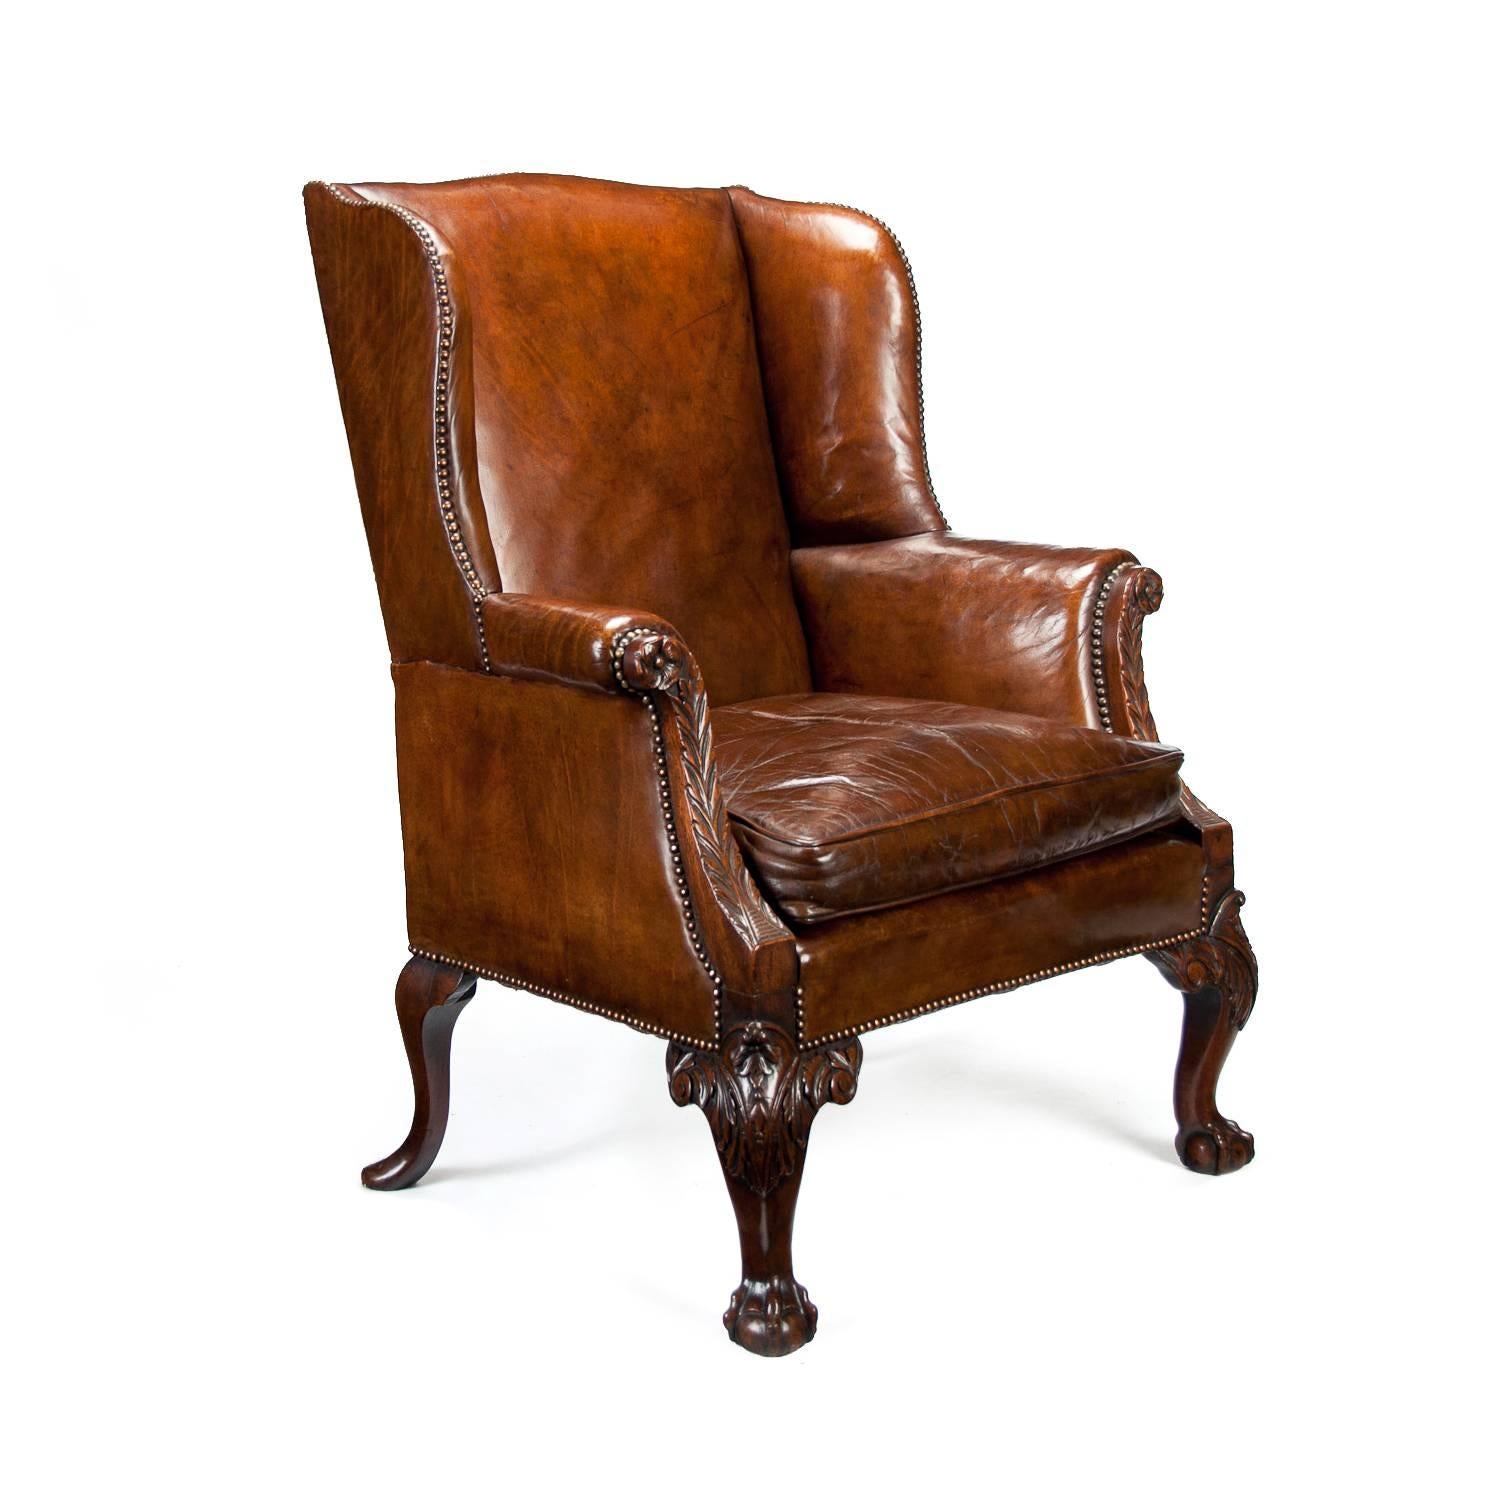 English Mid-19th Century Mahogany Leather Wing Armchair